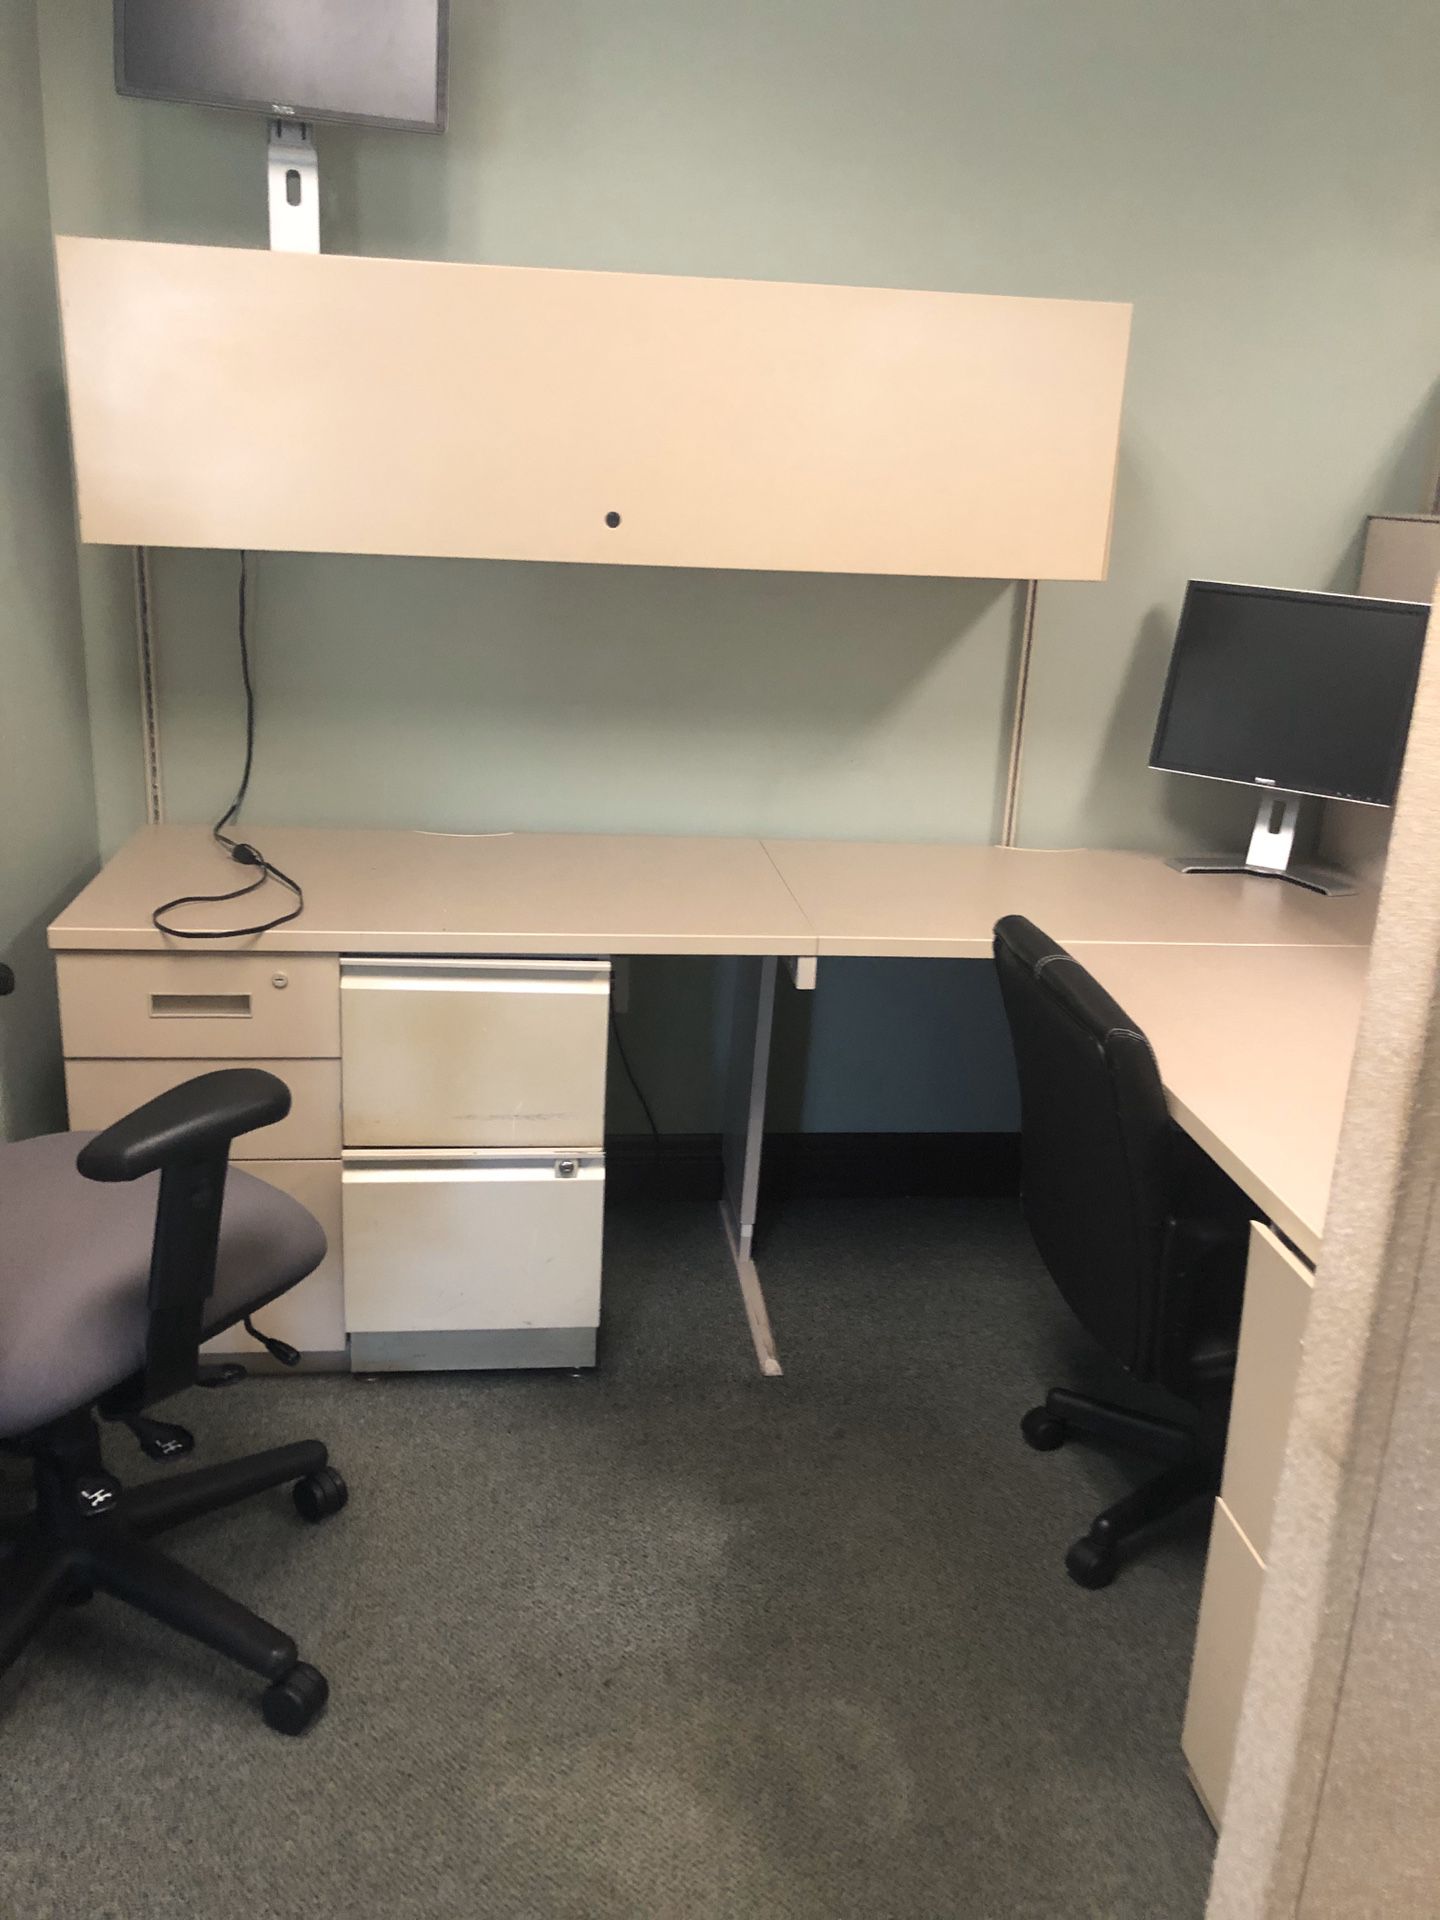 3 cubicles - FREE, just come pickup in Ft Lauderdale